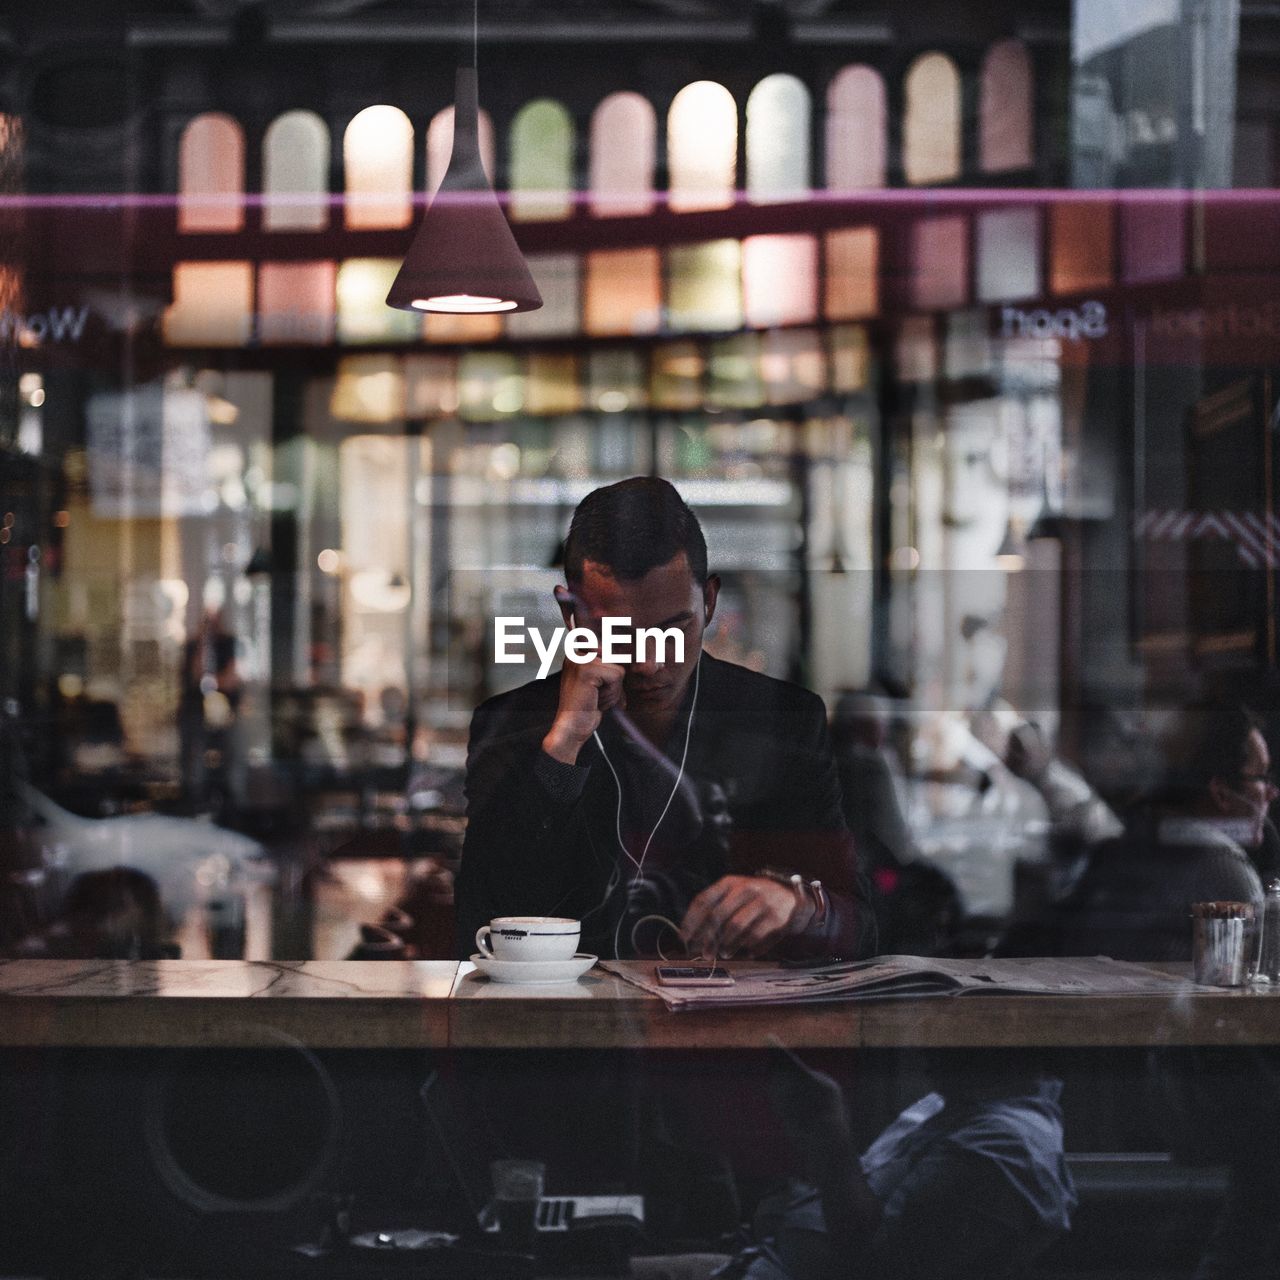 Man using phone on table in cafe seen through window